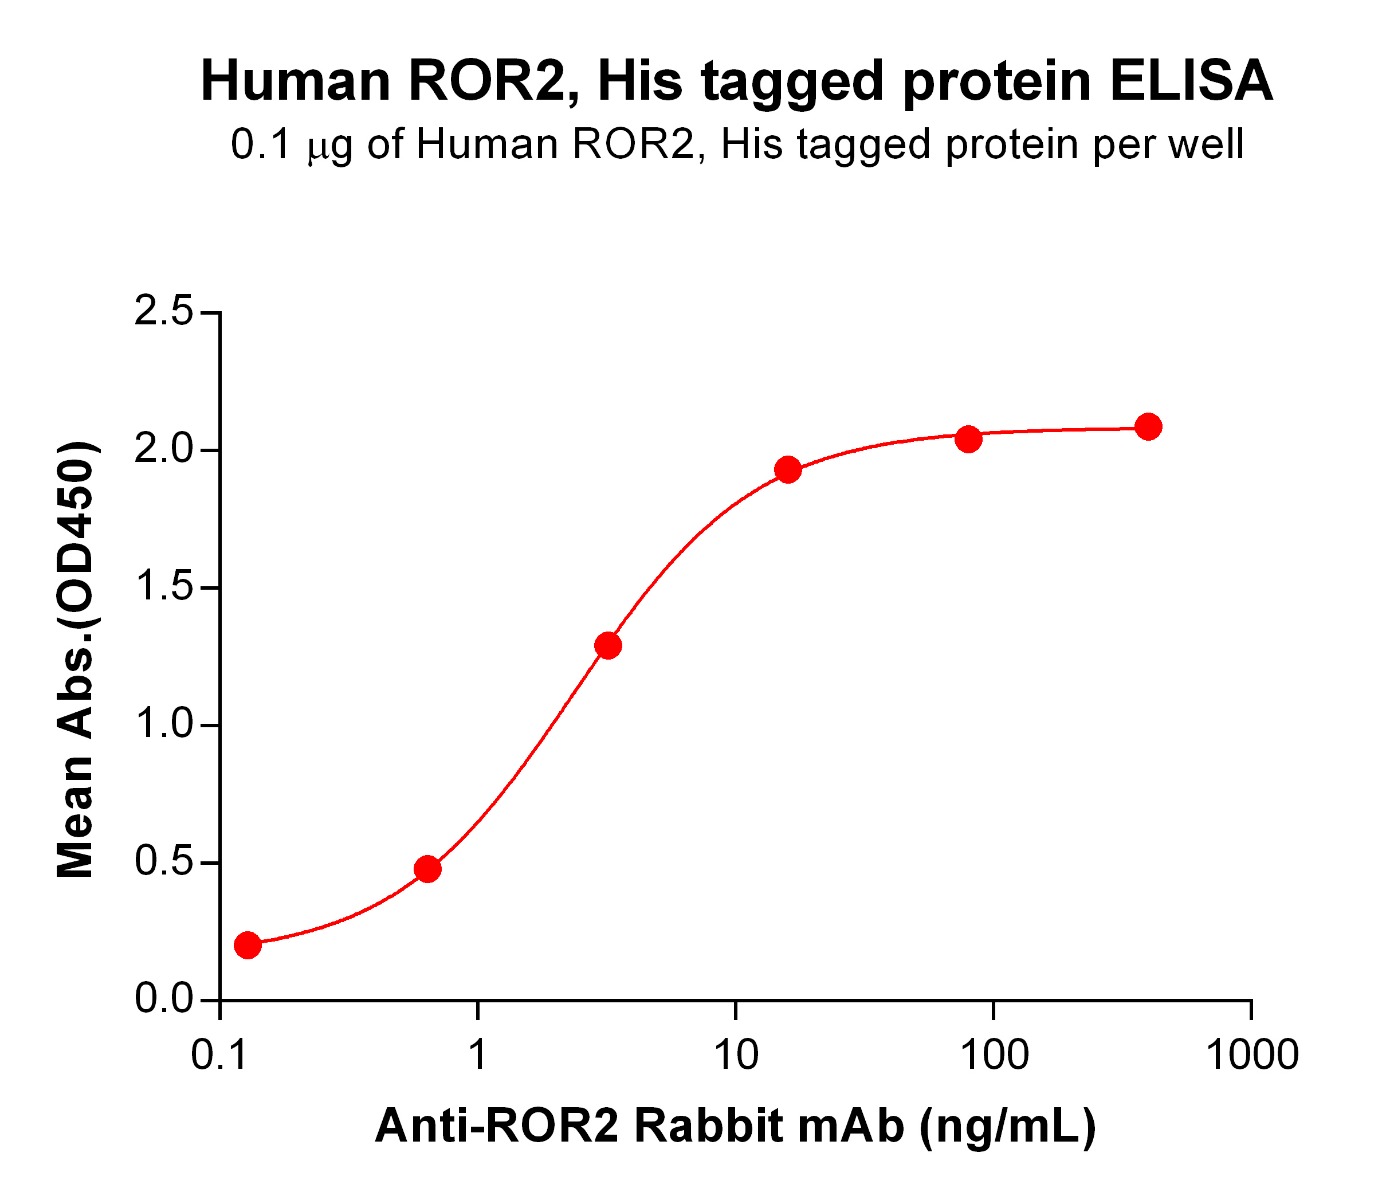 Human ROR2 Protein, His Tag